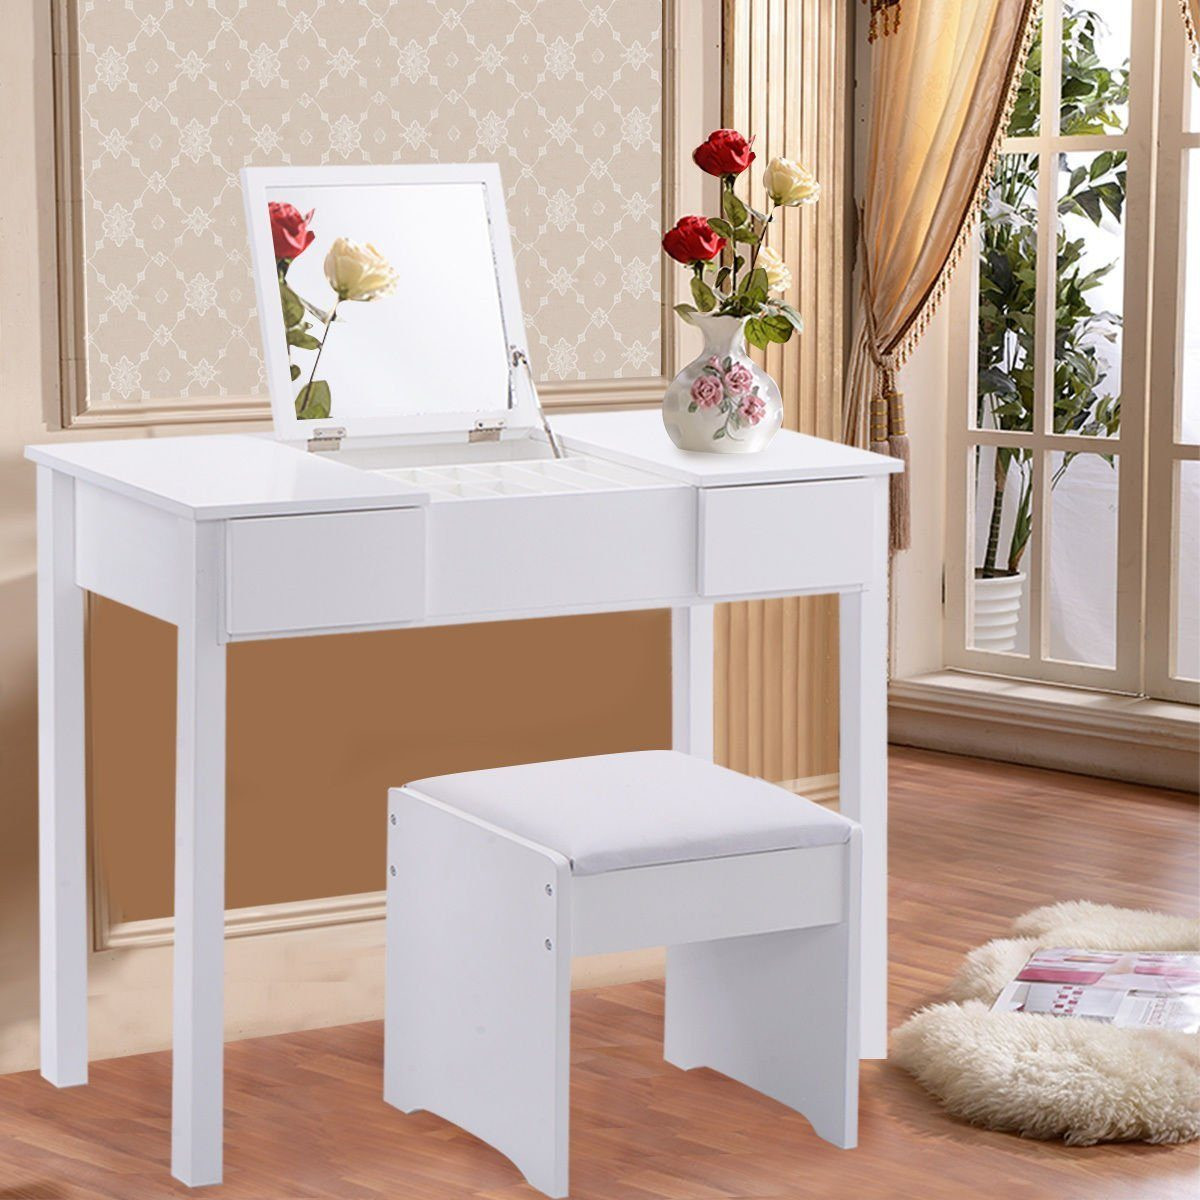 Bedroom Vanity Set With Lights
 Vanity Set Hollywood Modern Table With Storage Lights For